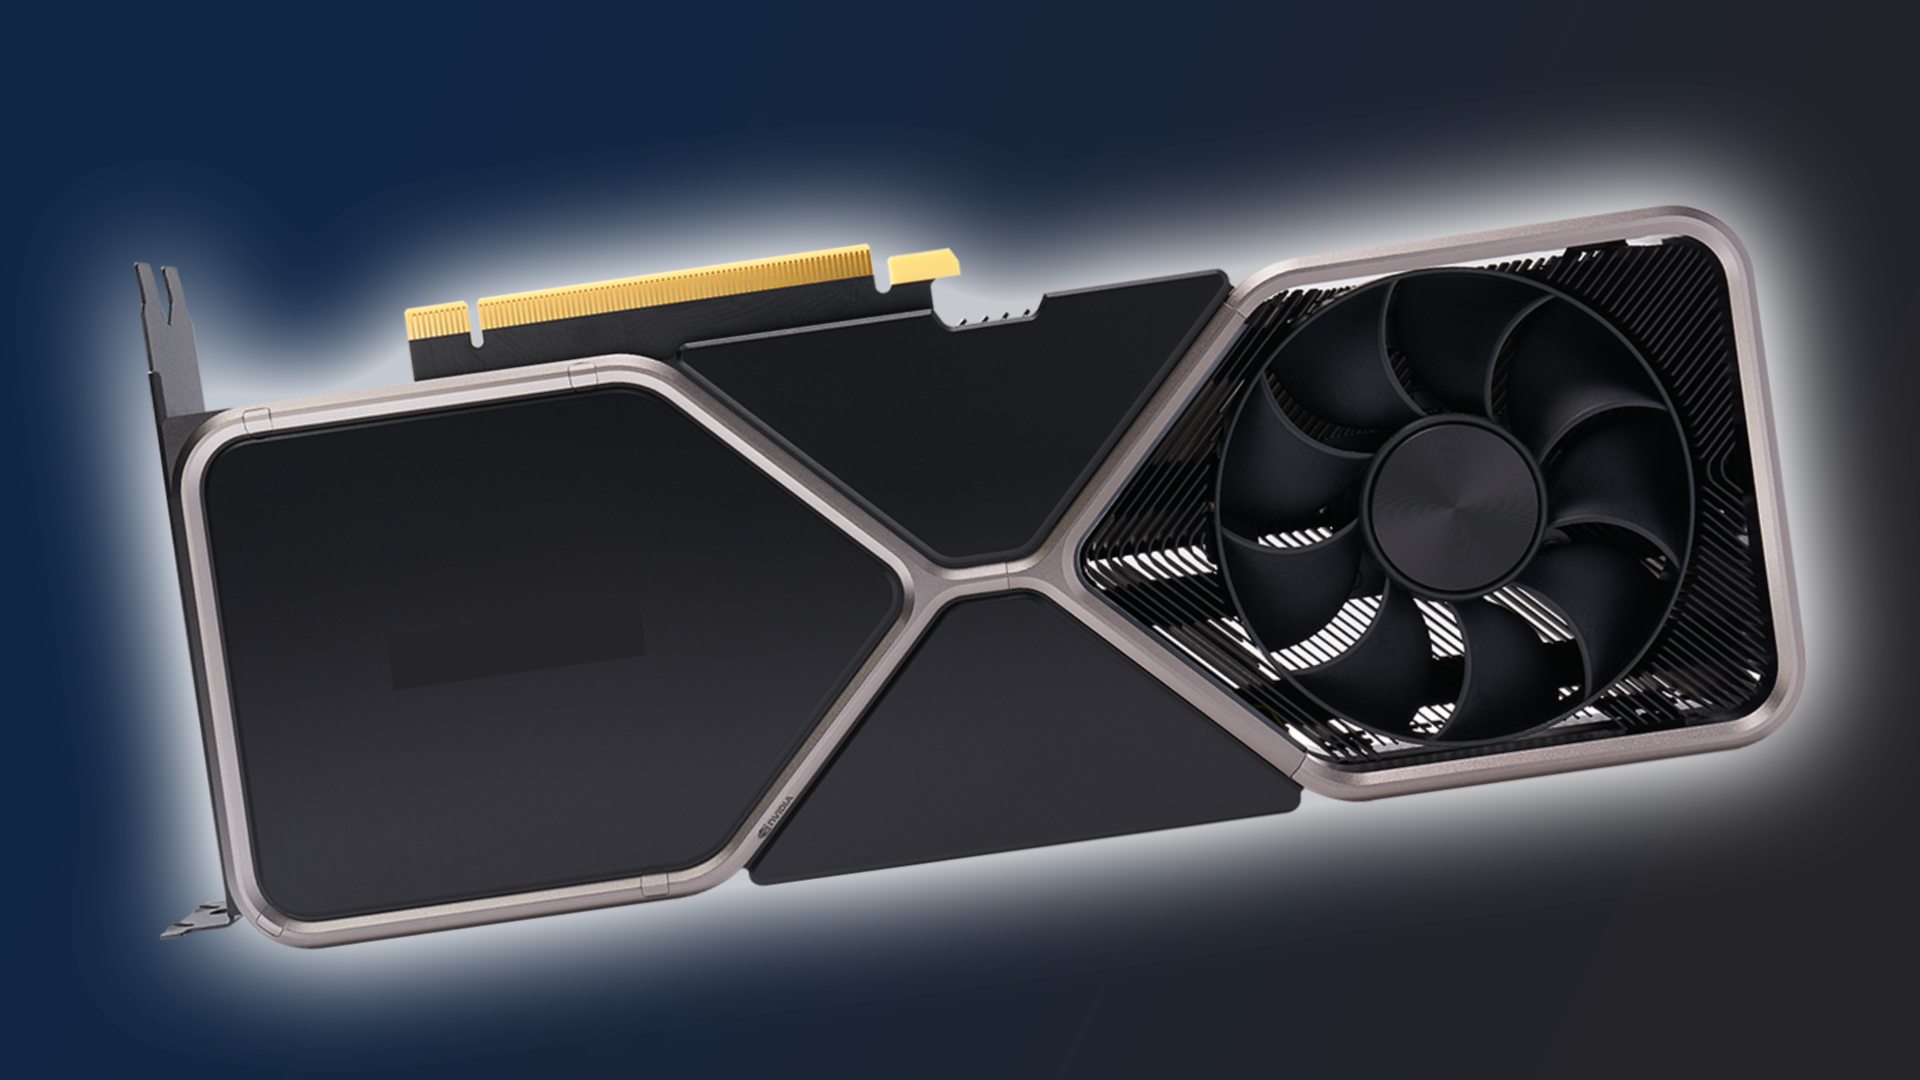 Nvidia RTX 4070 renders reveal a dinkier RTX 4000 GPU cooler